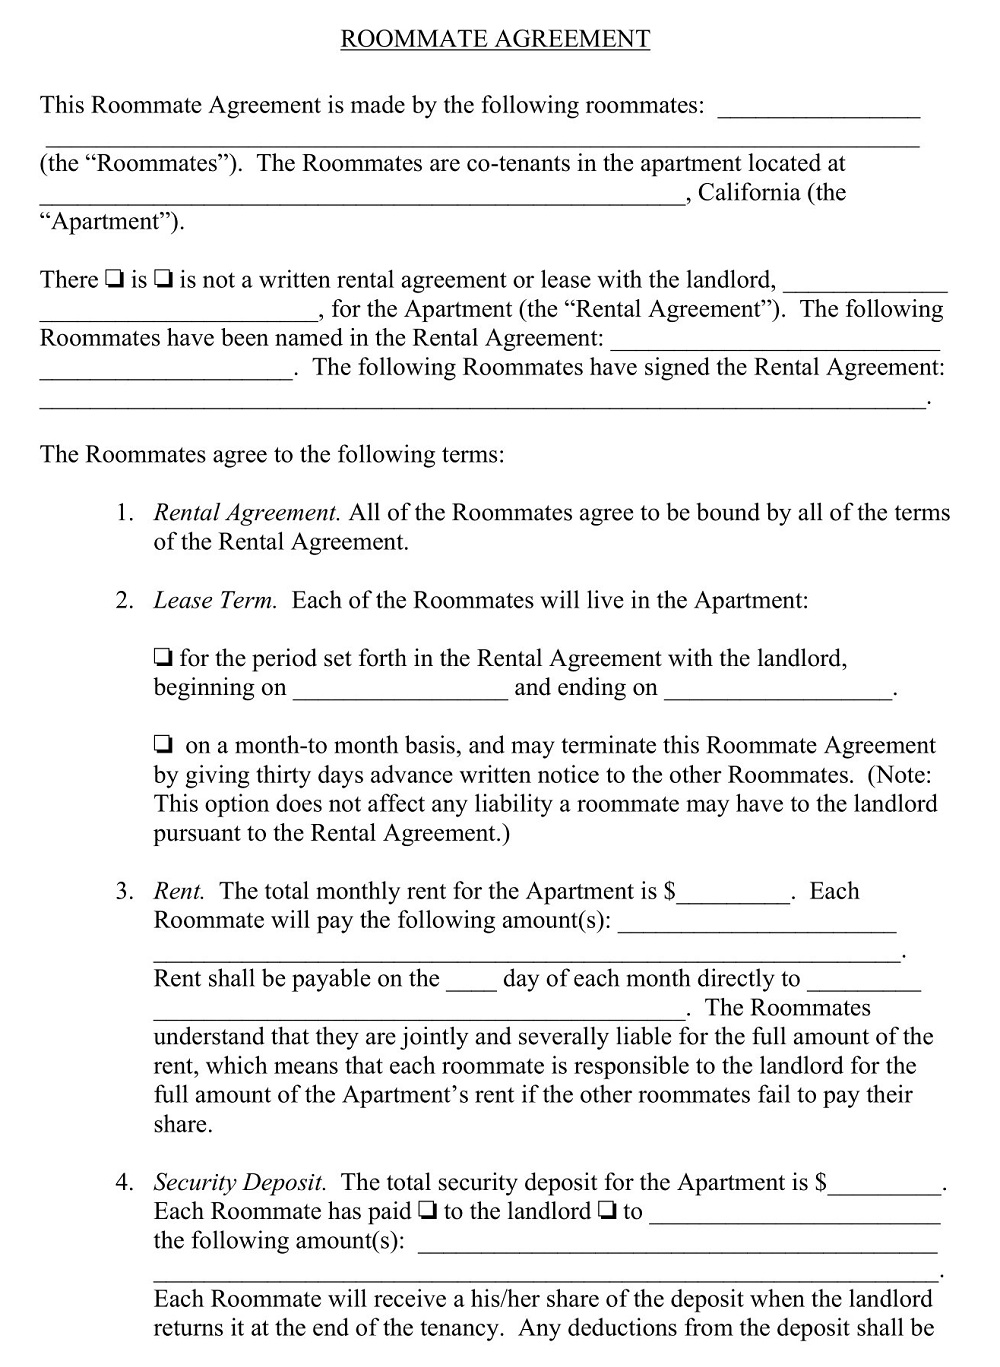 Roommate Agreement Form California